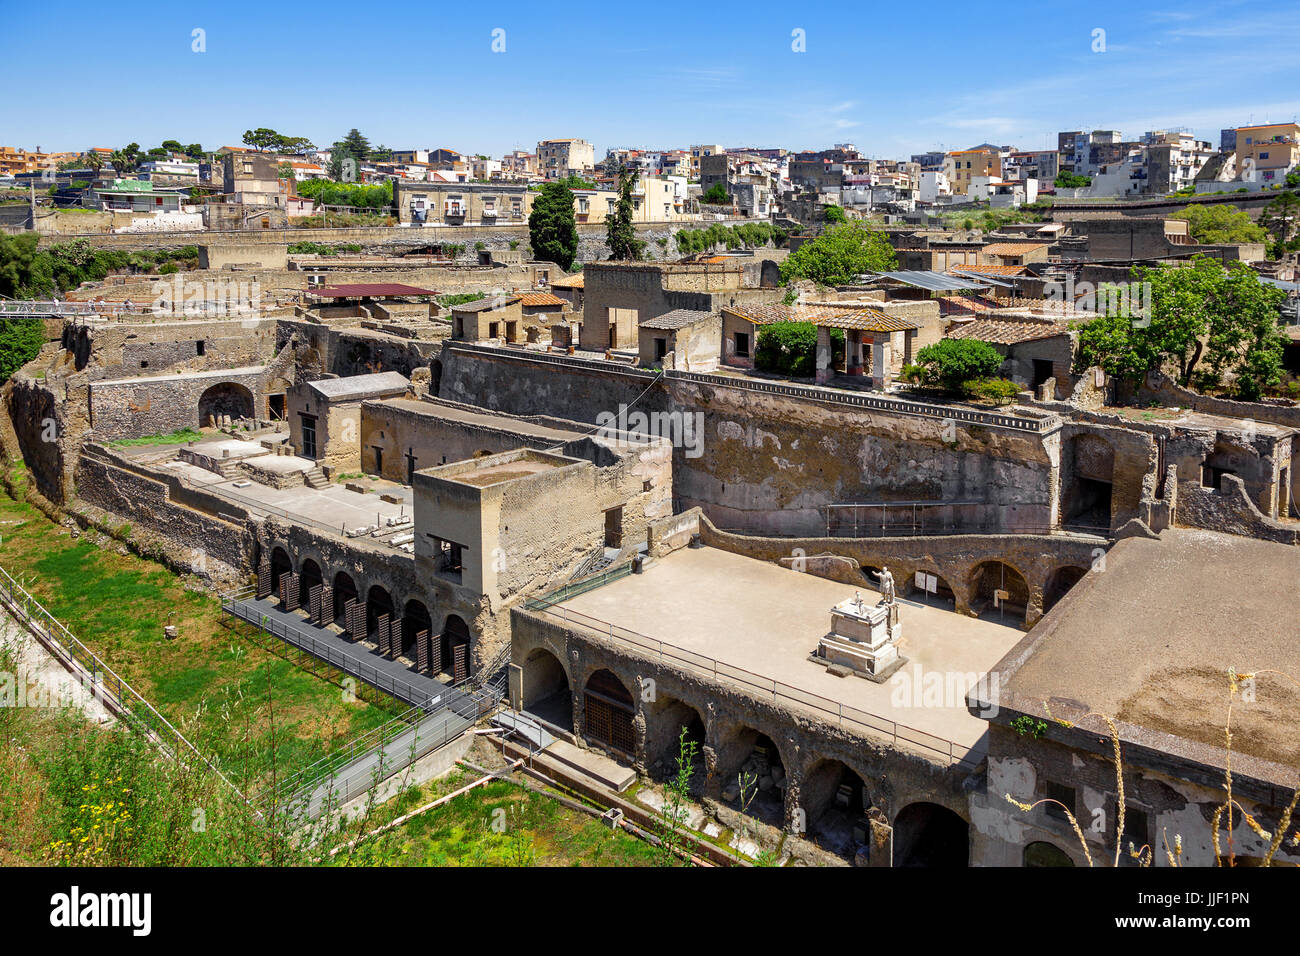 View of Ercolano and the Excavations of Herculaneum, Campania, Italy Stock Photo